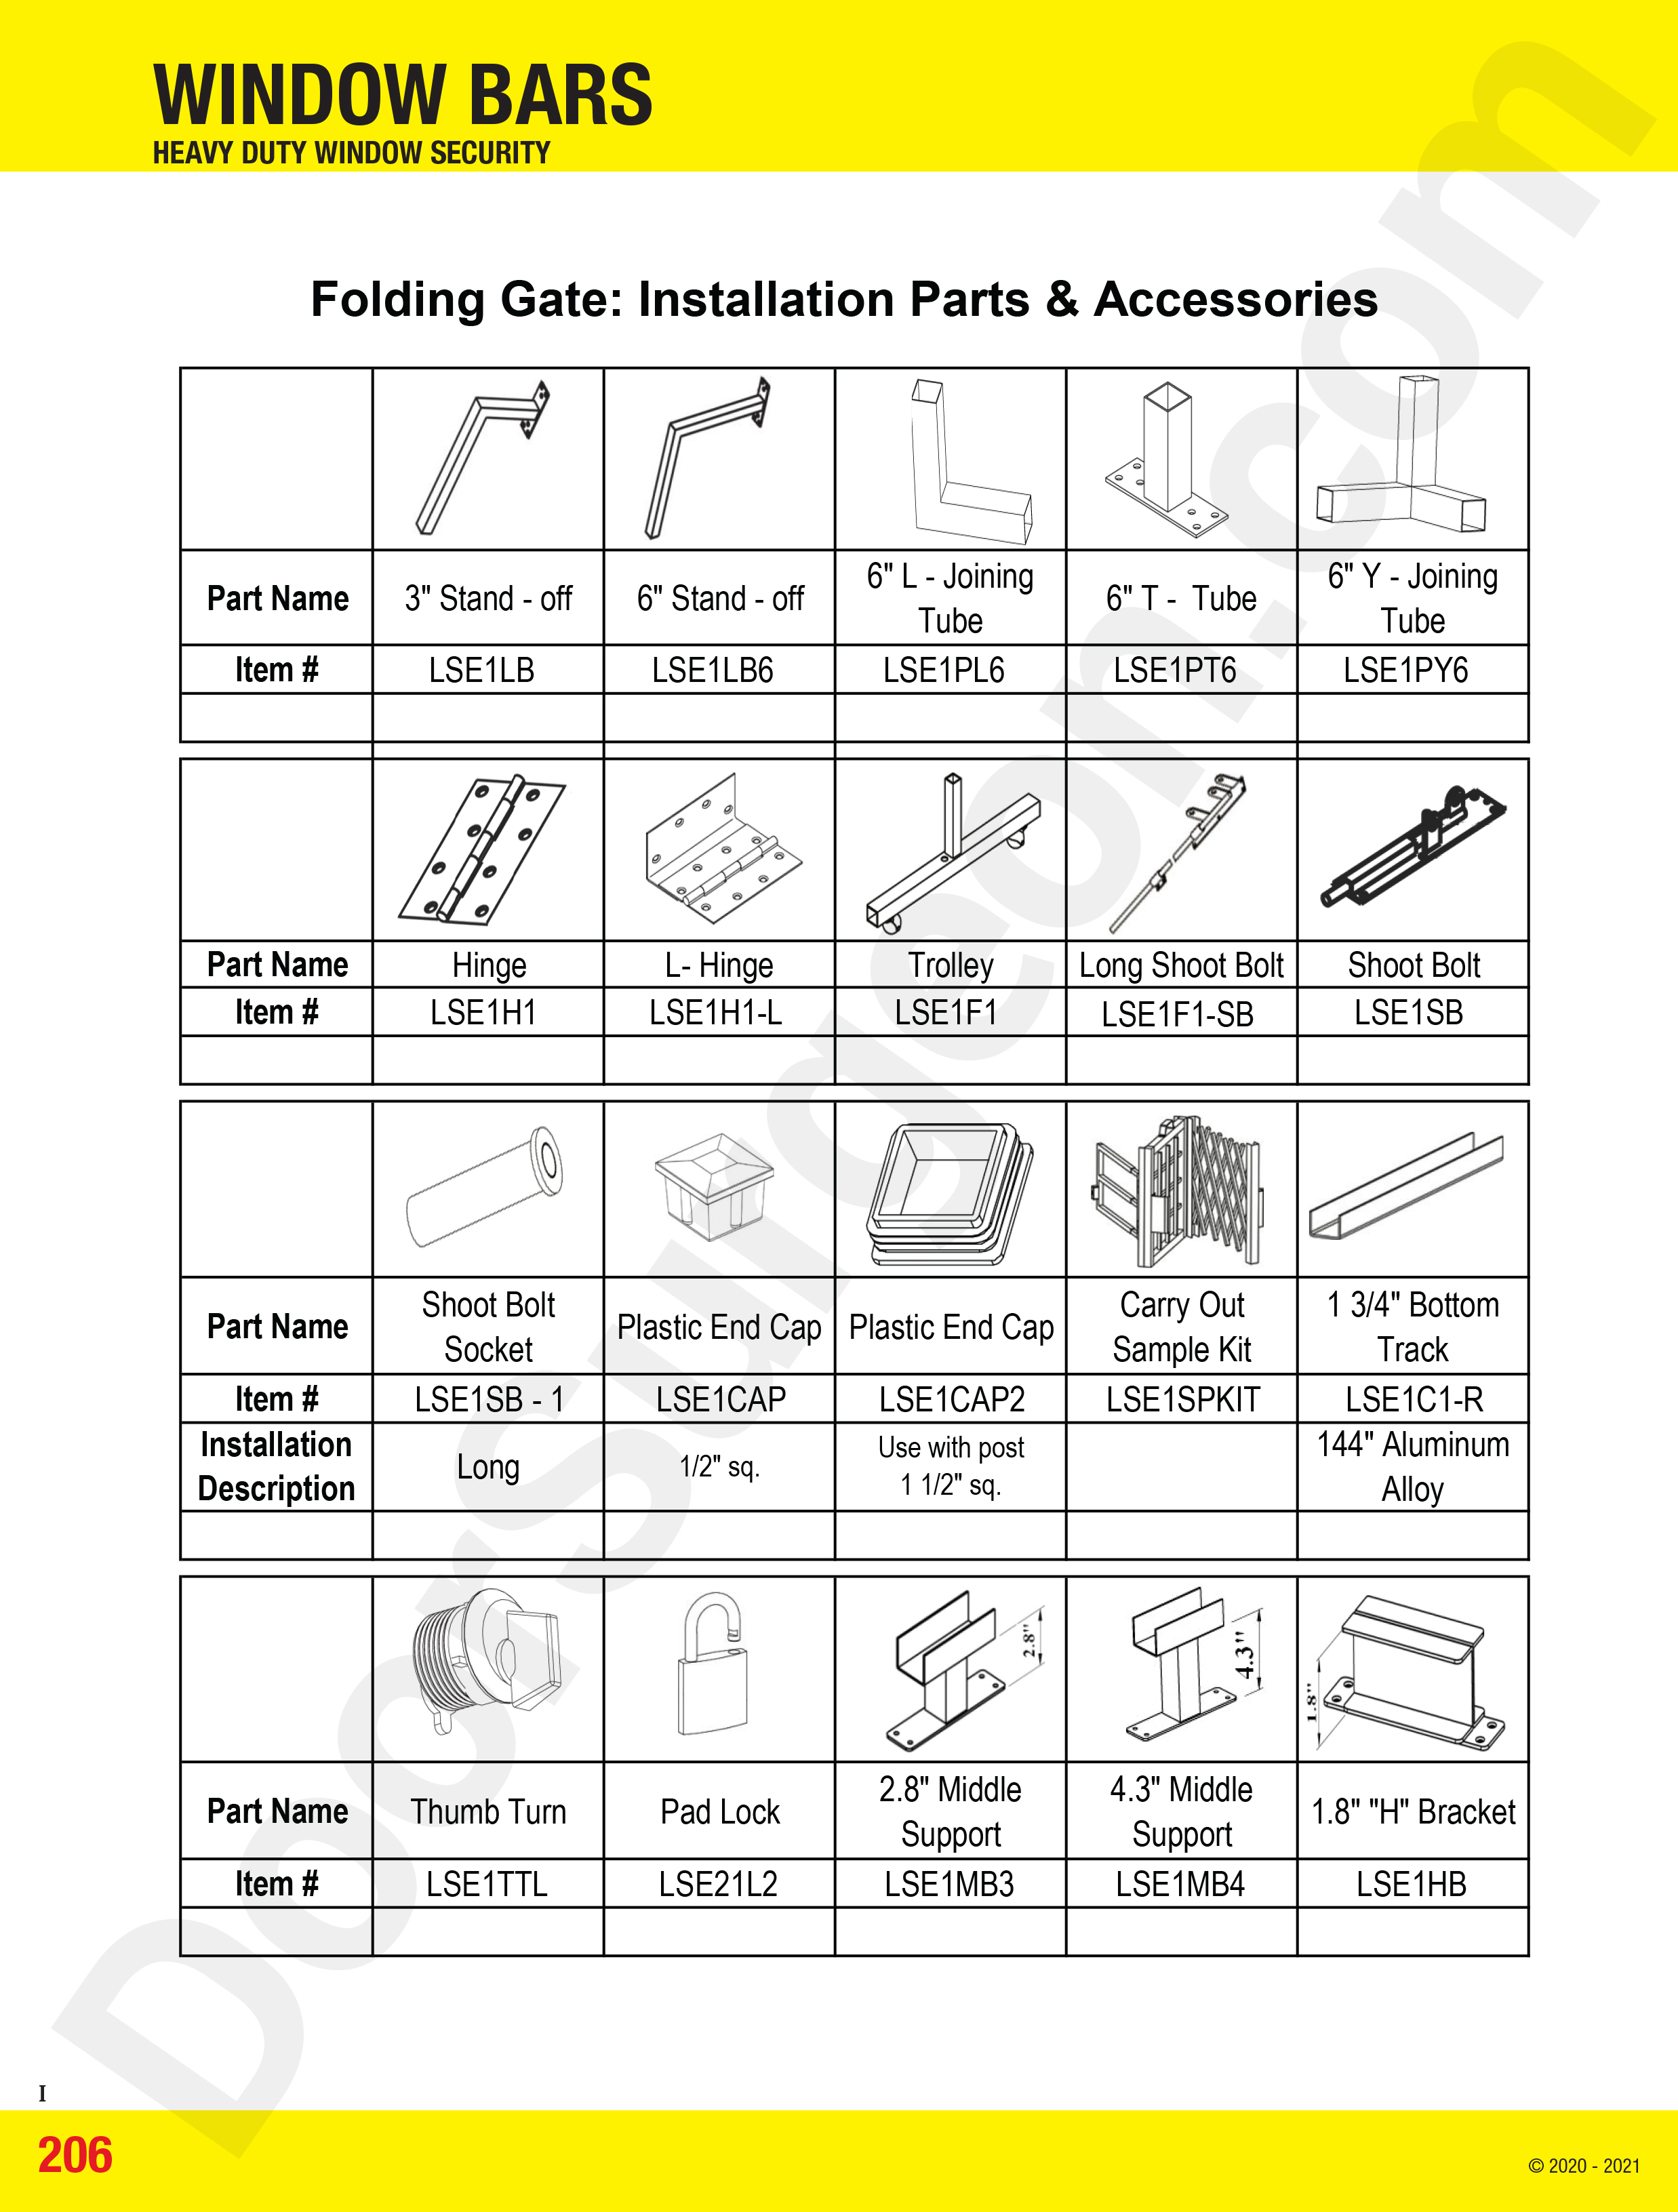 Morinville Door Surgeon folding gates installation parts and accessories.